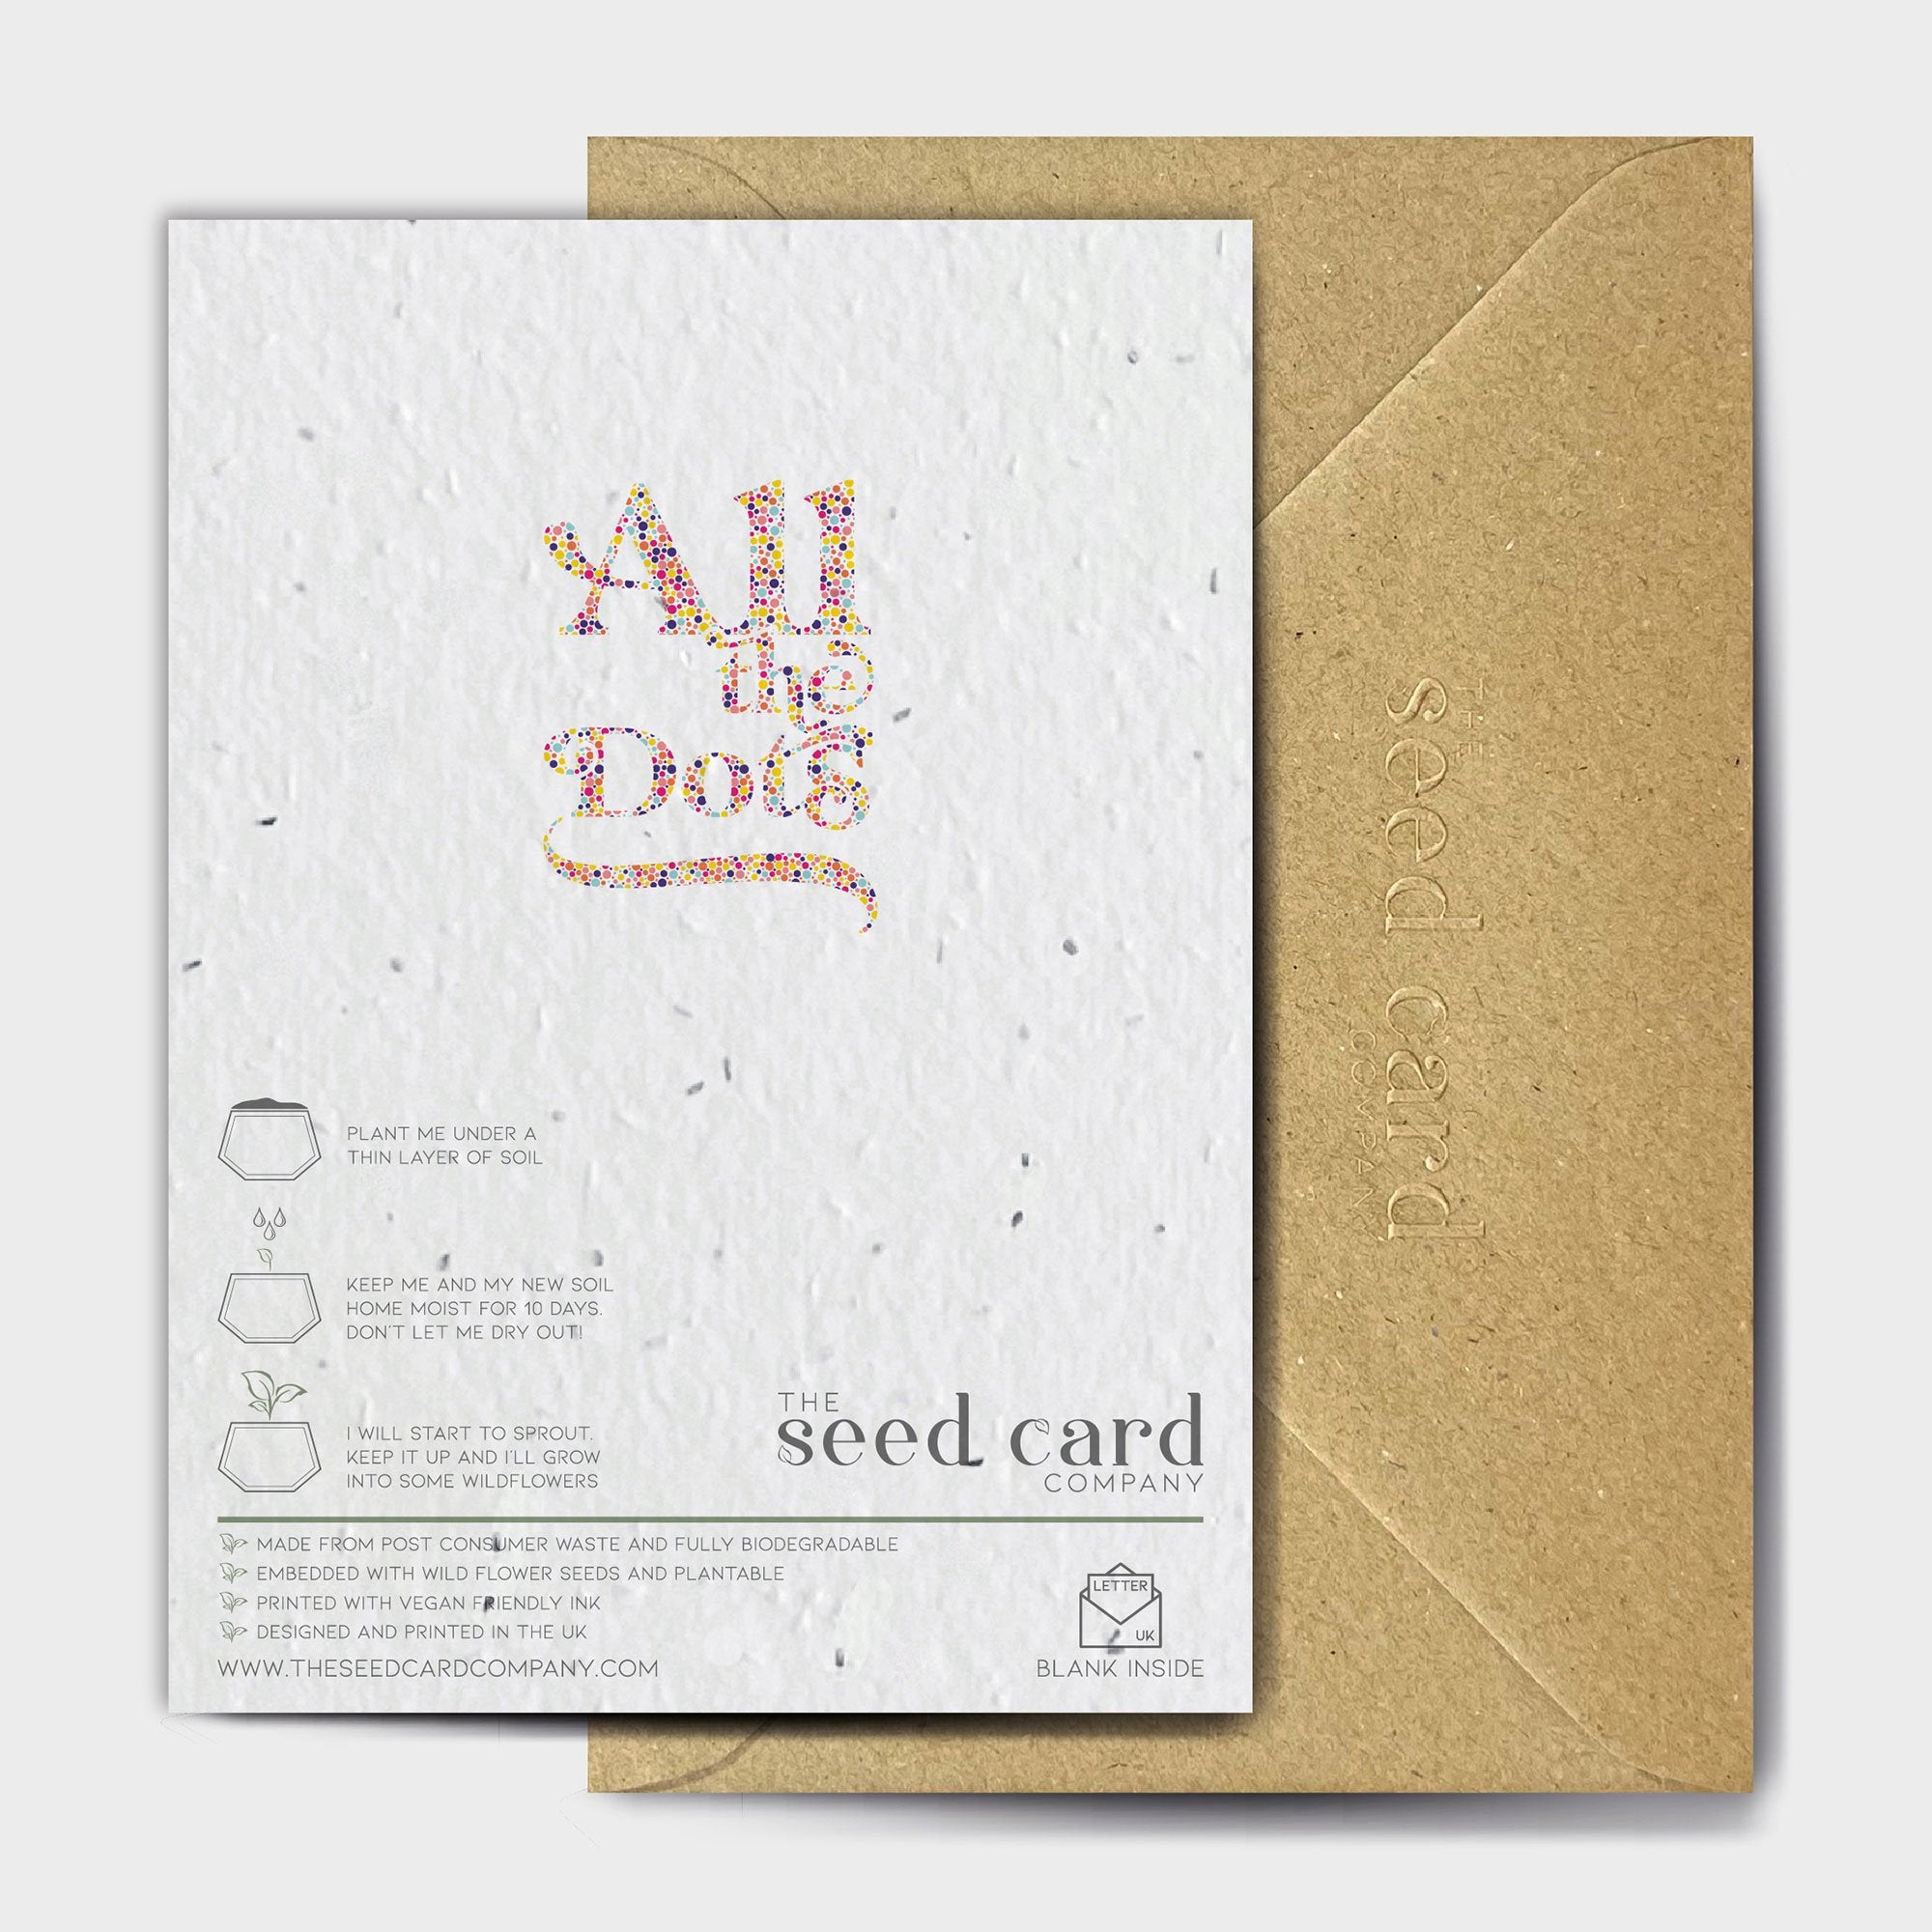 Shop online Sending Dots of Hugs - 100% biodegradable seed-embedded cards Shop -The Seed Card Company